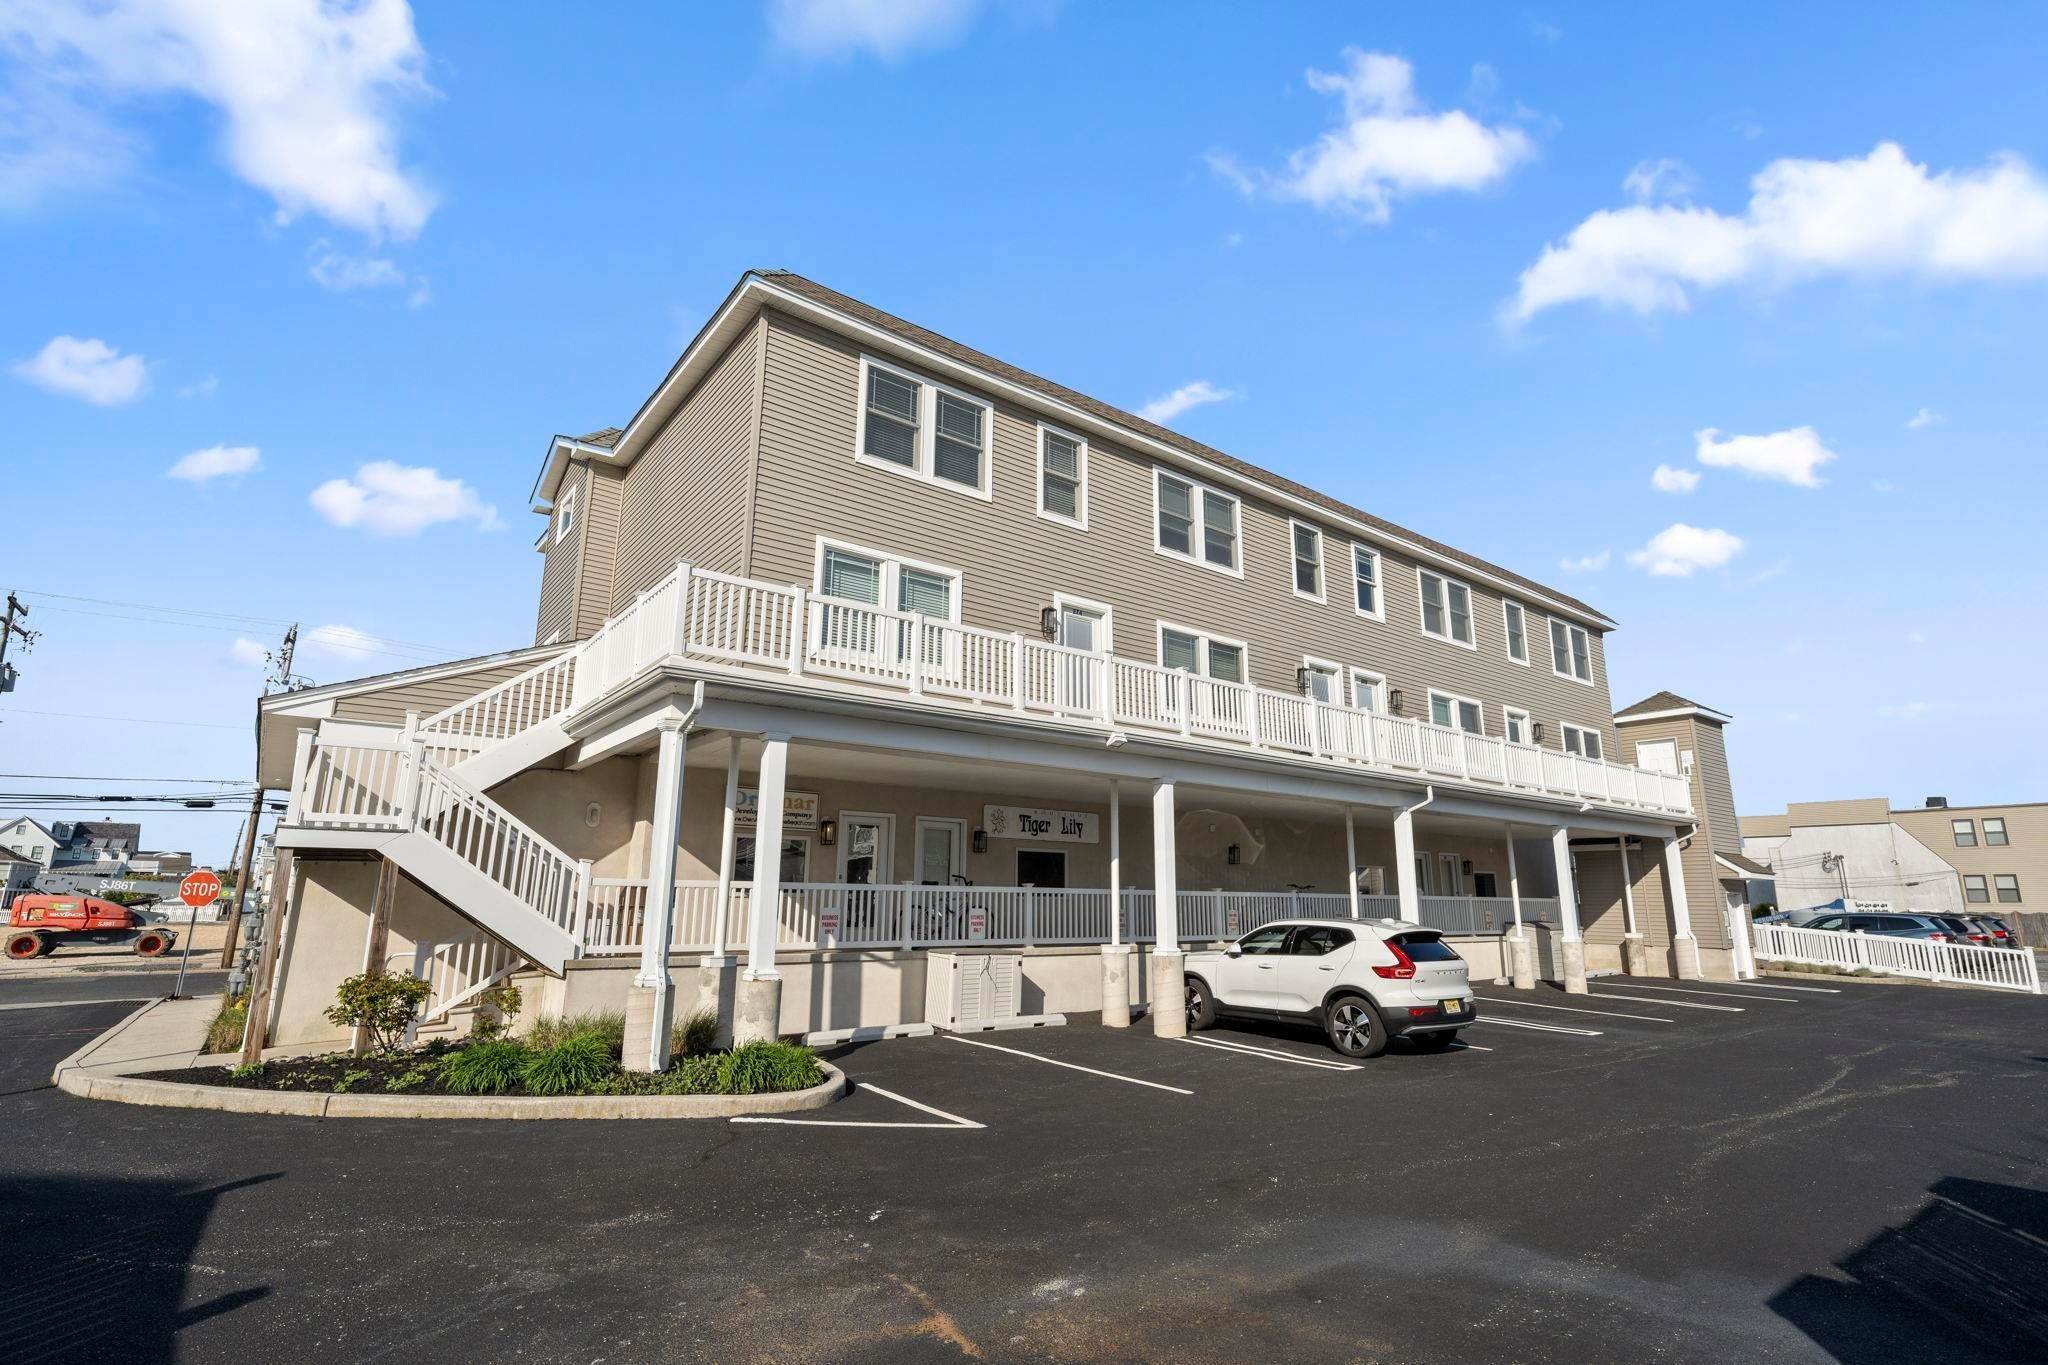 1. Condominiums for Sale at 270 21st Street Avalon, New Jersey 08202 United States